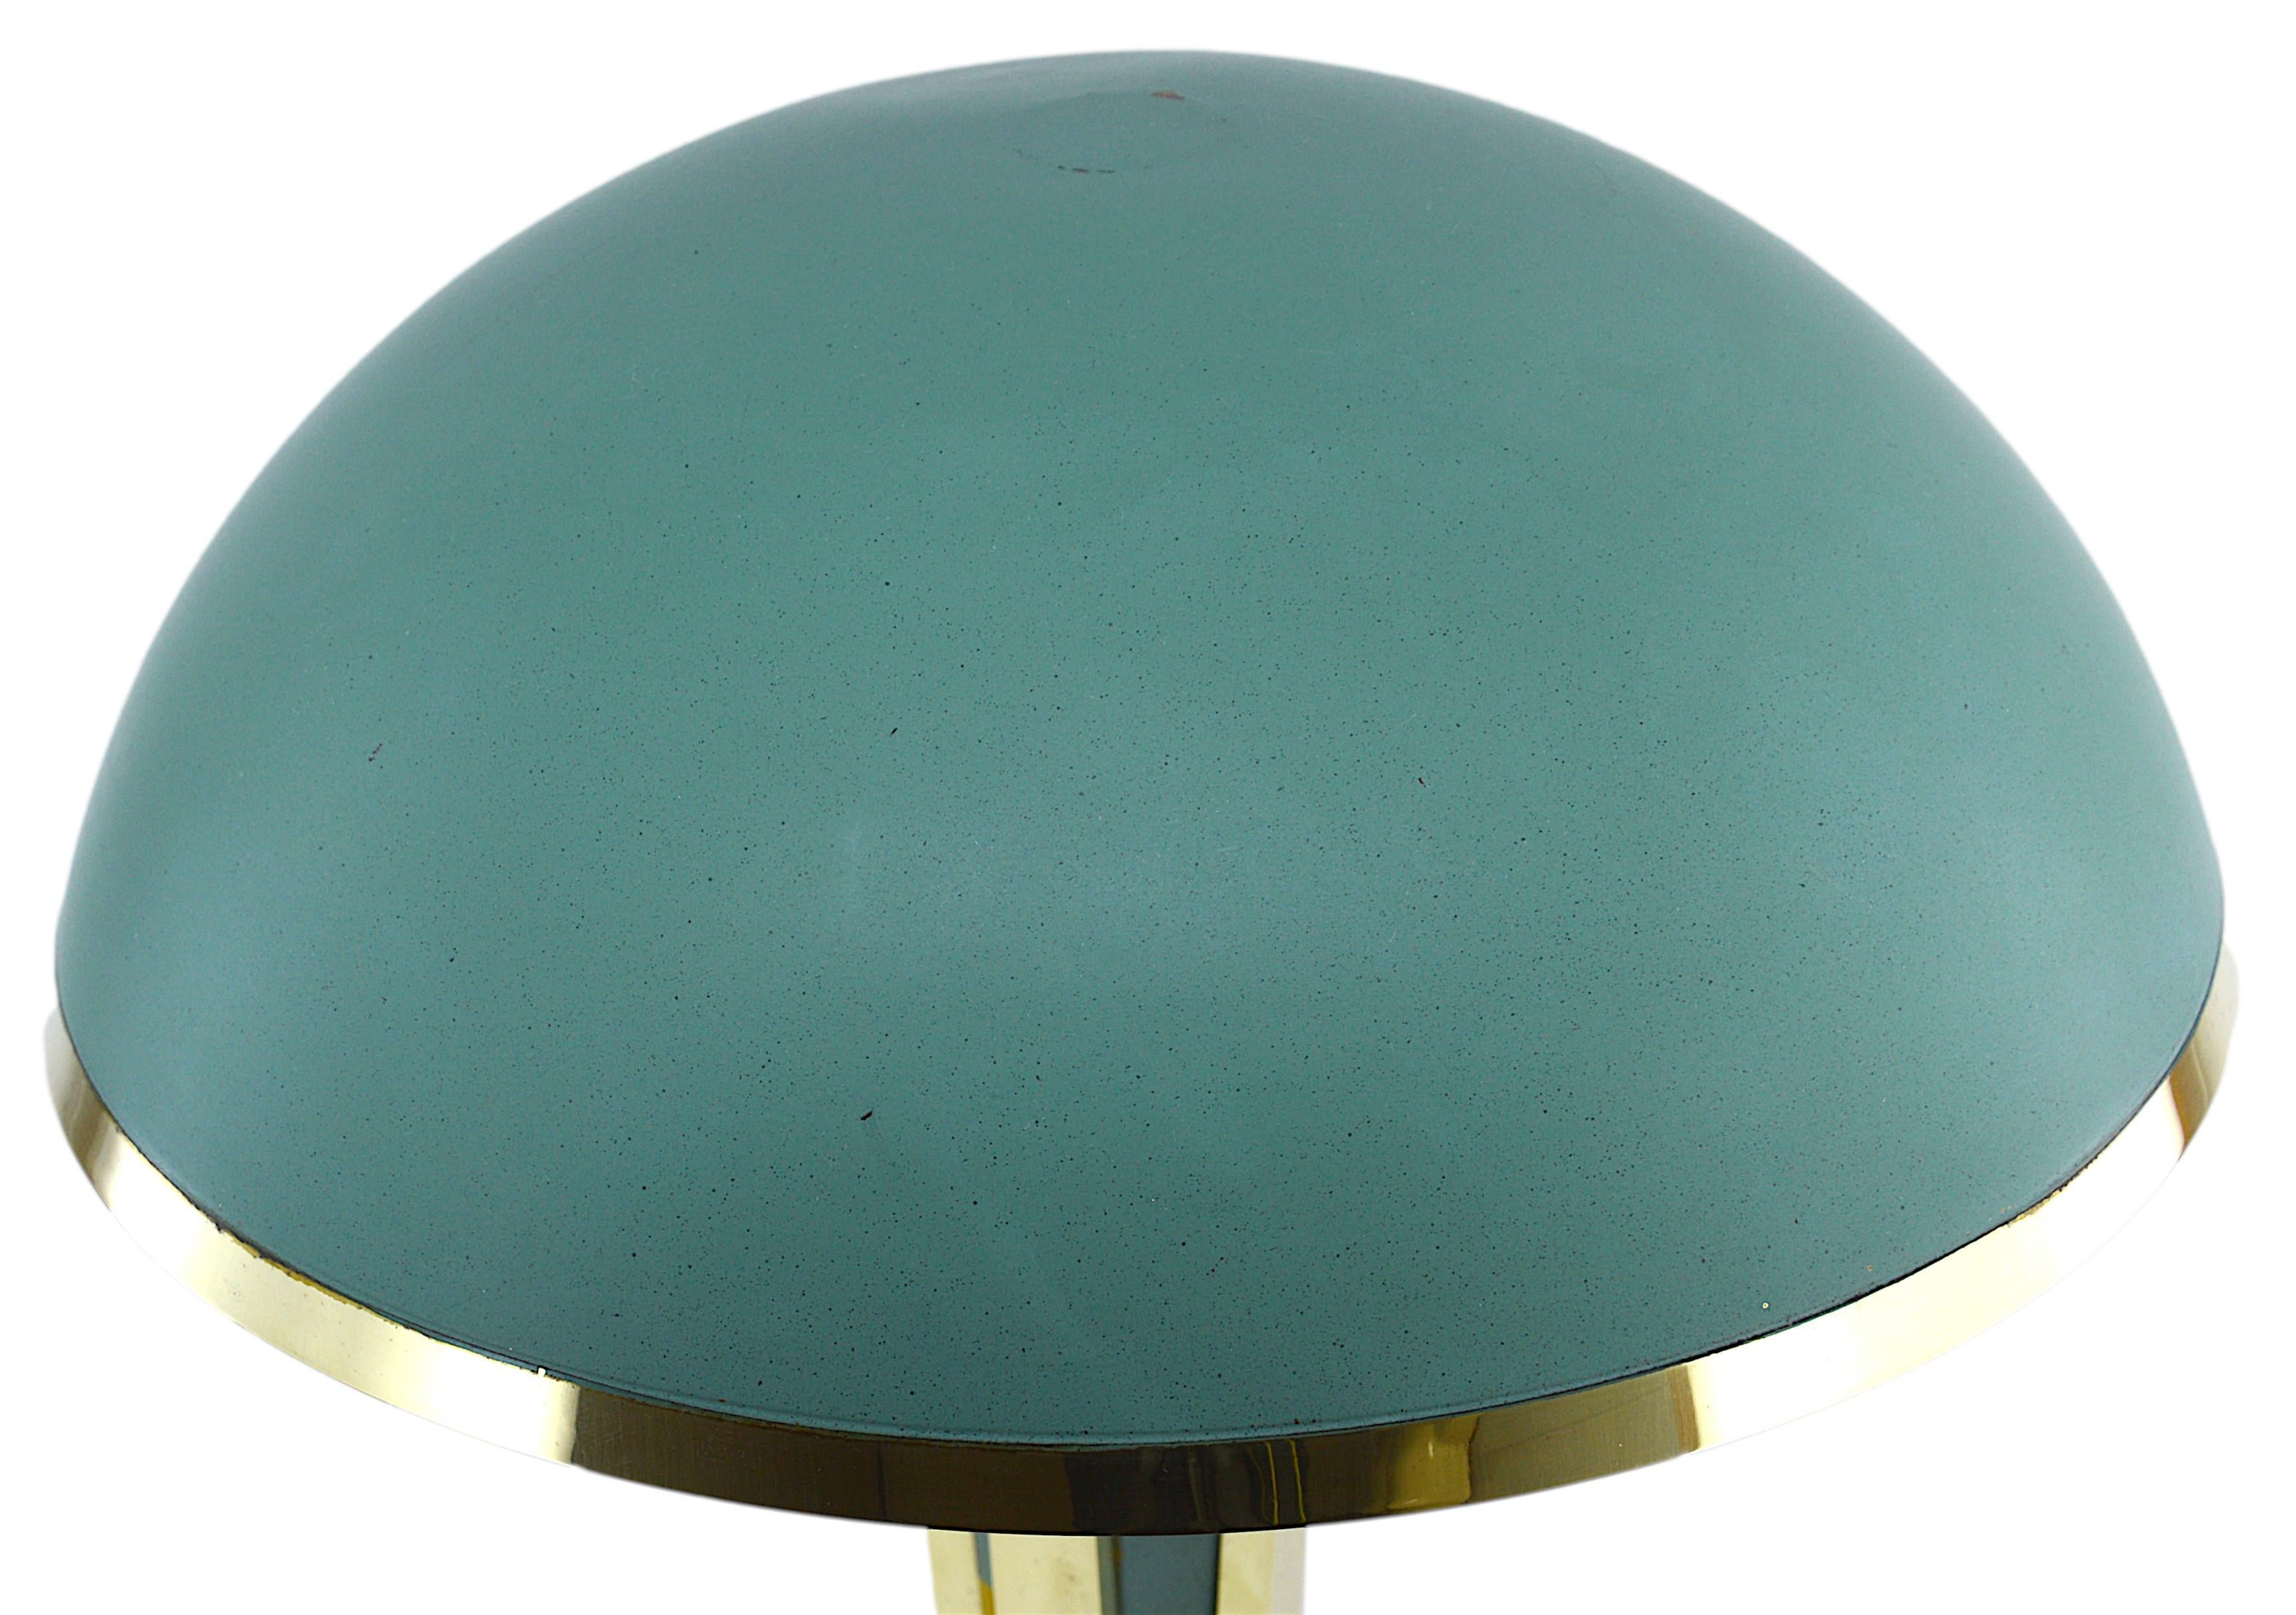 Mid-20th Century French Art Deco Desk or Table Lamp, circa 1940 For Sale